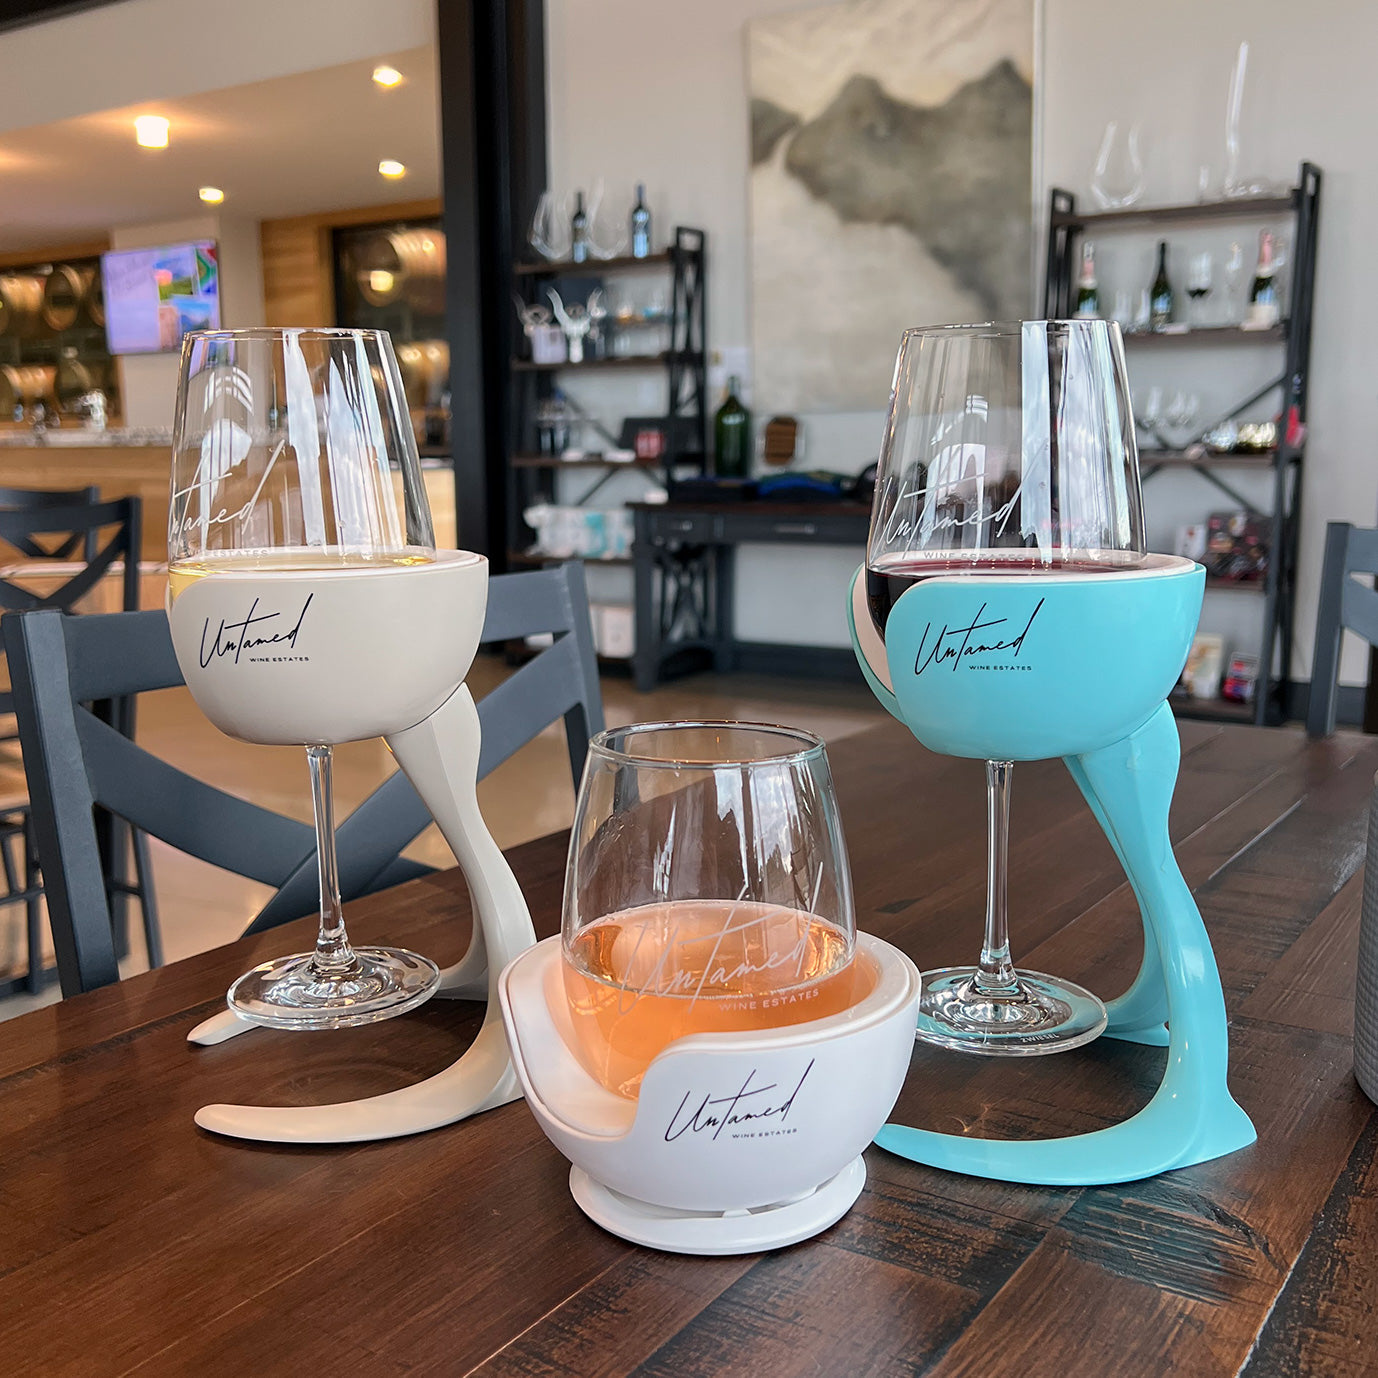 stemmed and stemless wine glasses in vochill wine chillers at winery with winery logos on vochill products